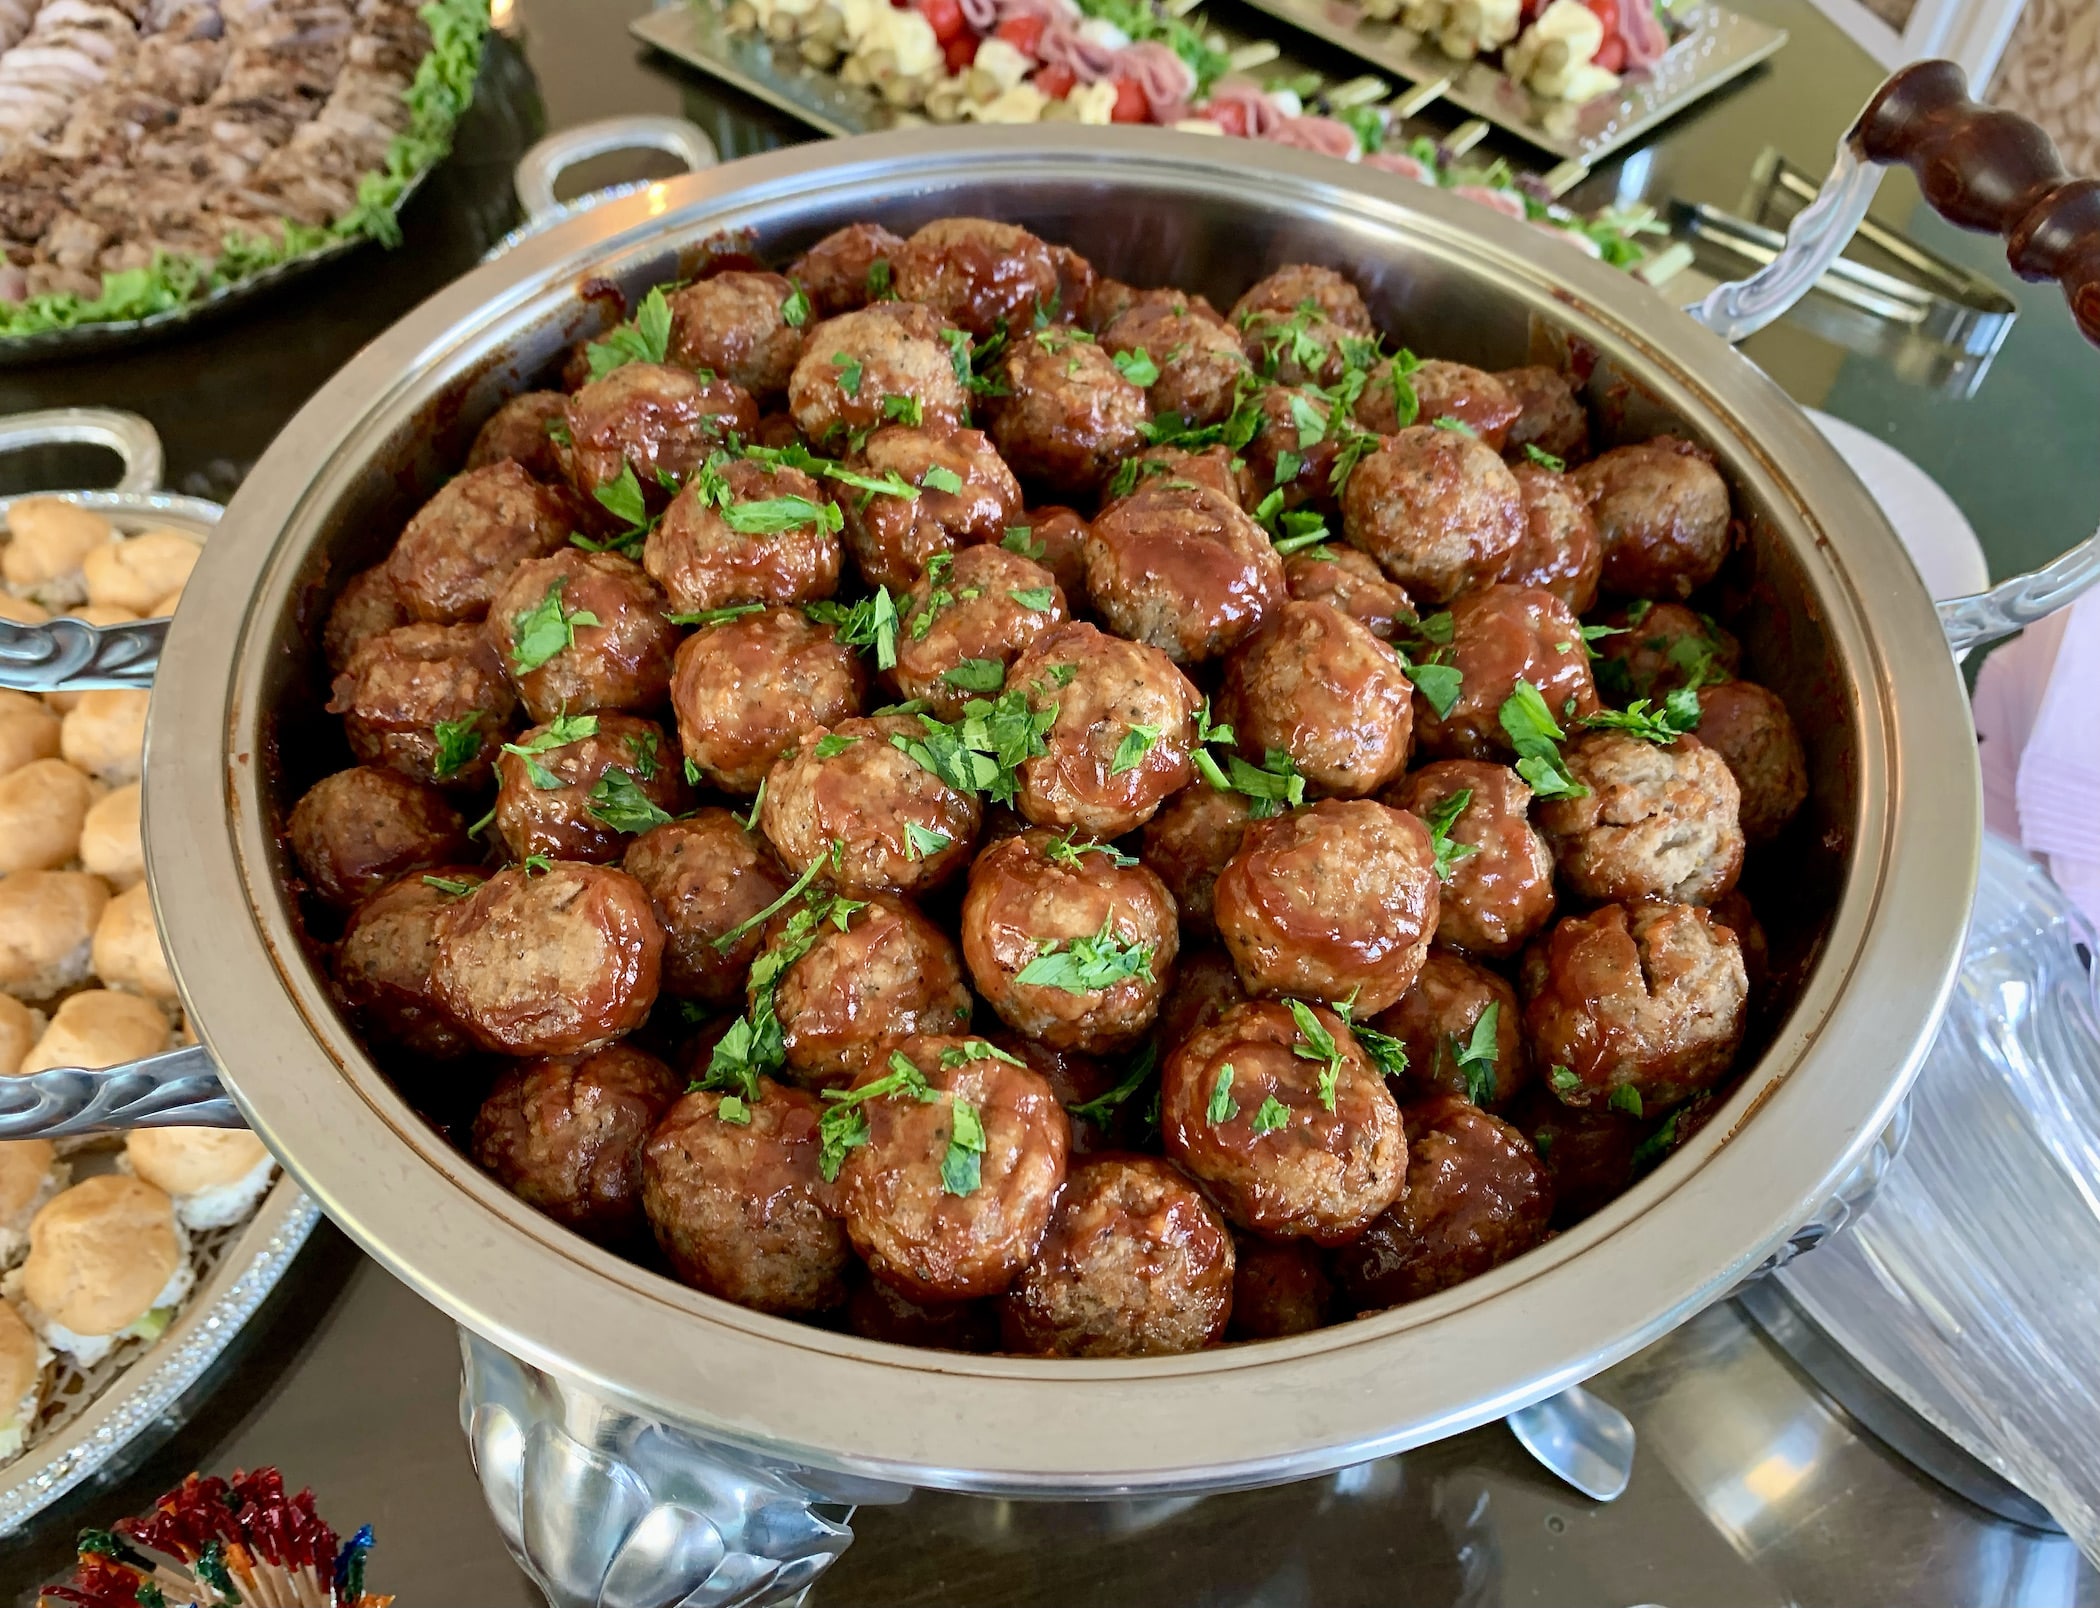 Herb-seasoned beef meatballs roasted in tangy barbeque sauce. Served warm with party picks.